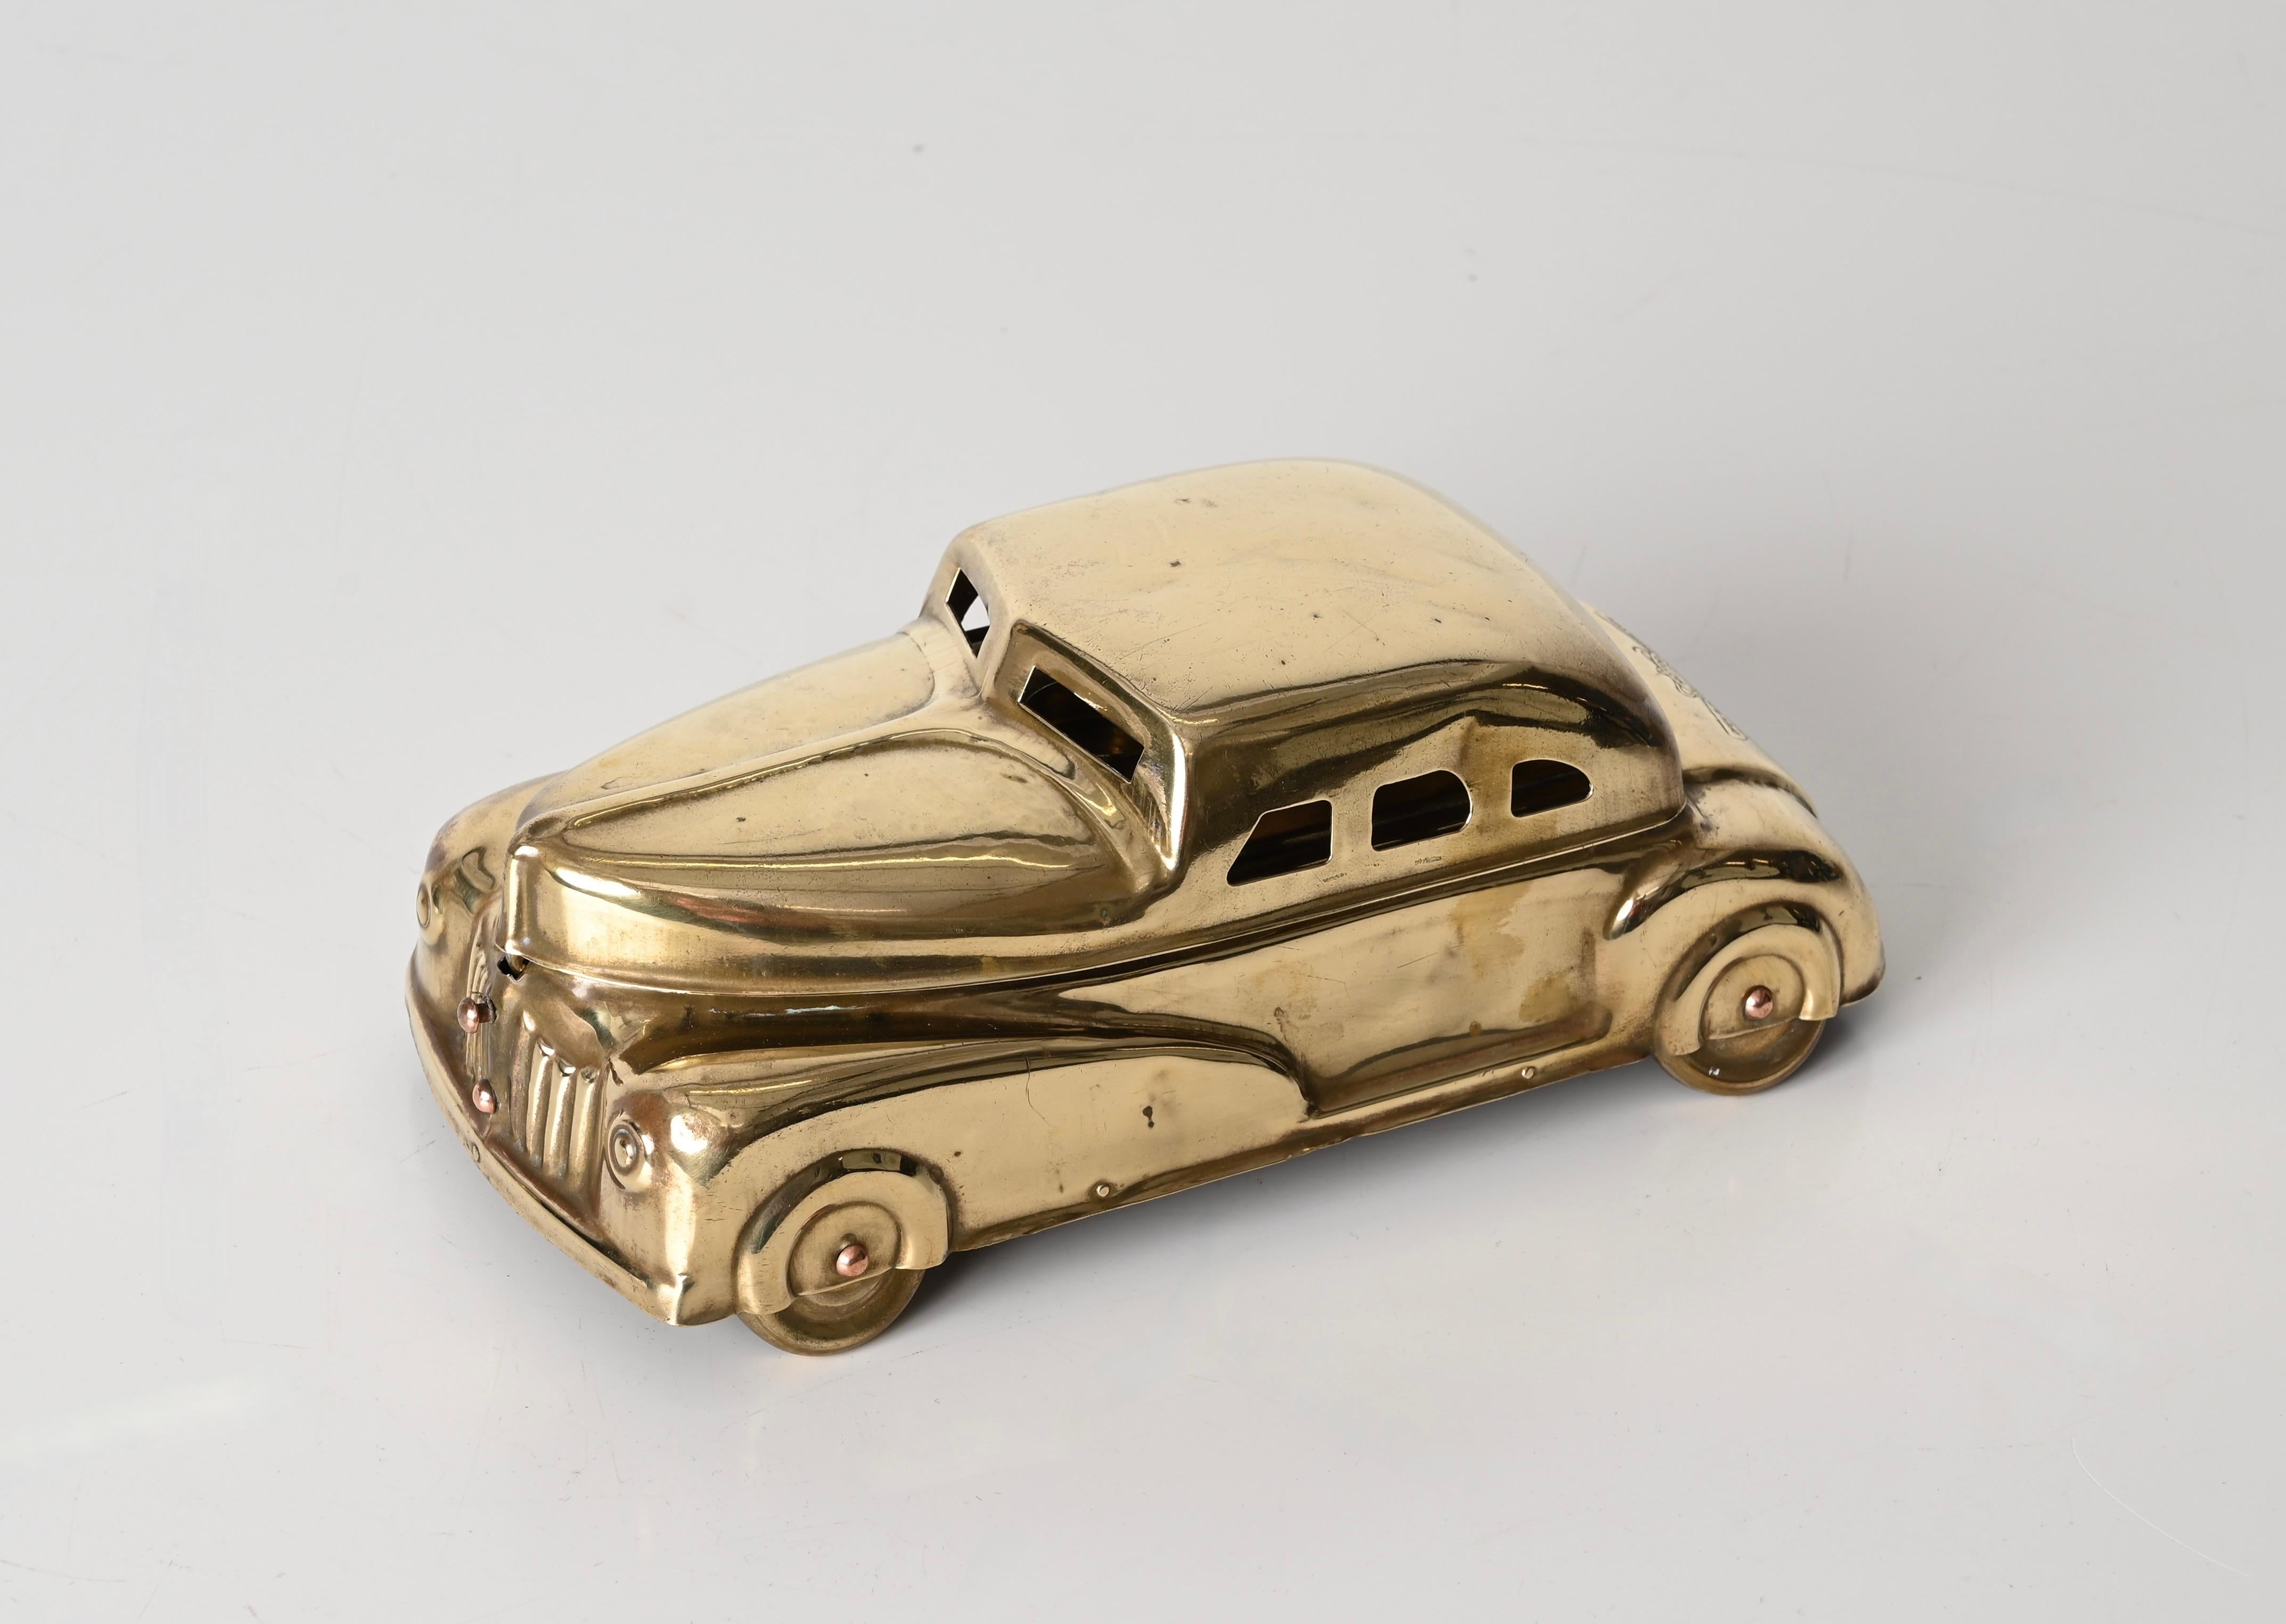 Lovely Art Deco model car fully made in brass. This charming model car box with many purposes was made in the US during the 1930s.

Patent 75086 - This elegant and rare brass model car could be used as display item, as a desk set for storing ink or